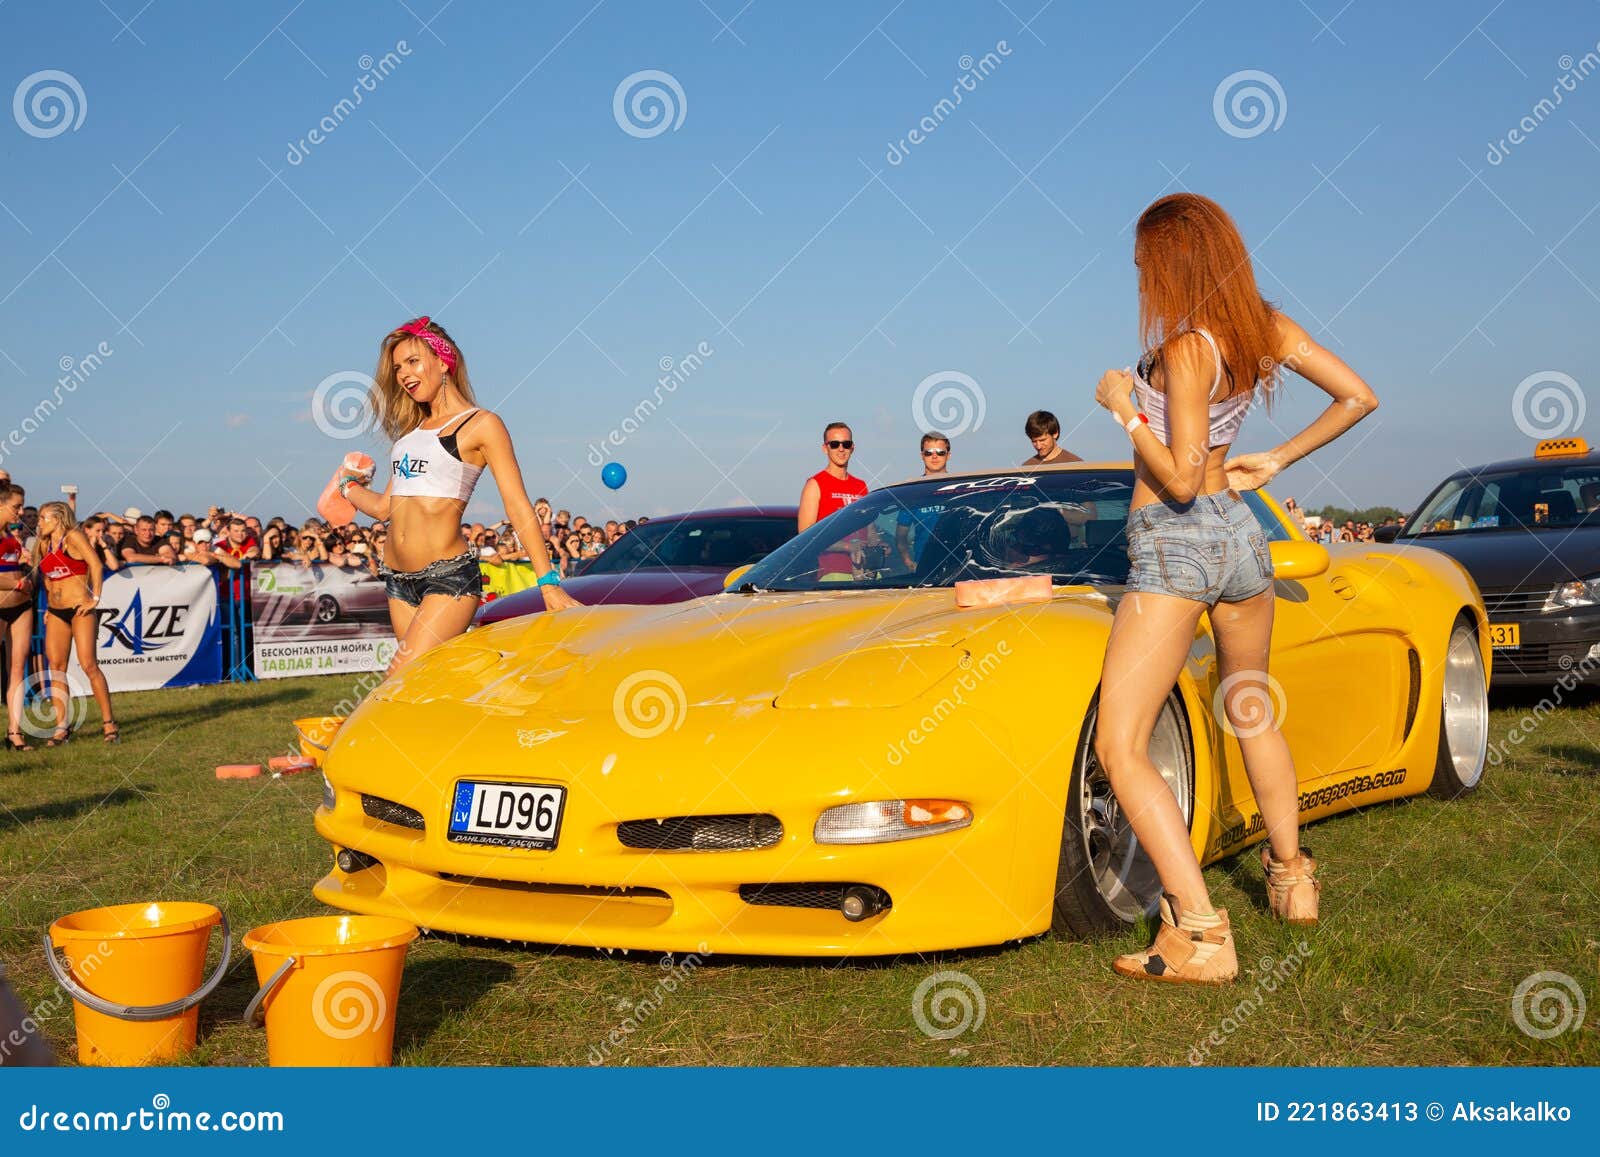 Naked Girls With Hot Cars